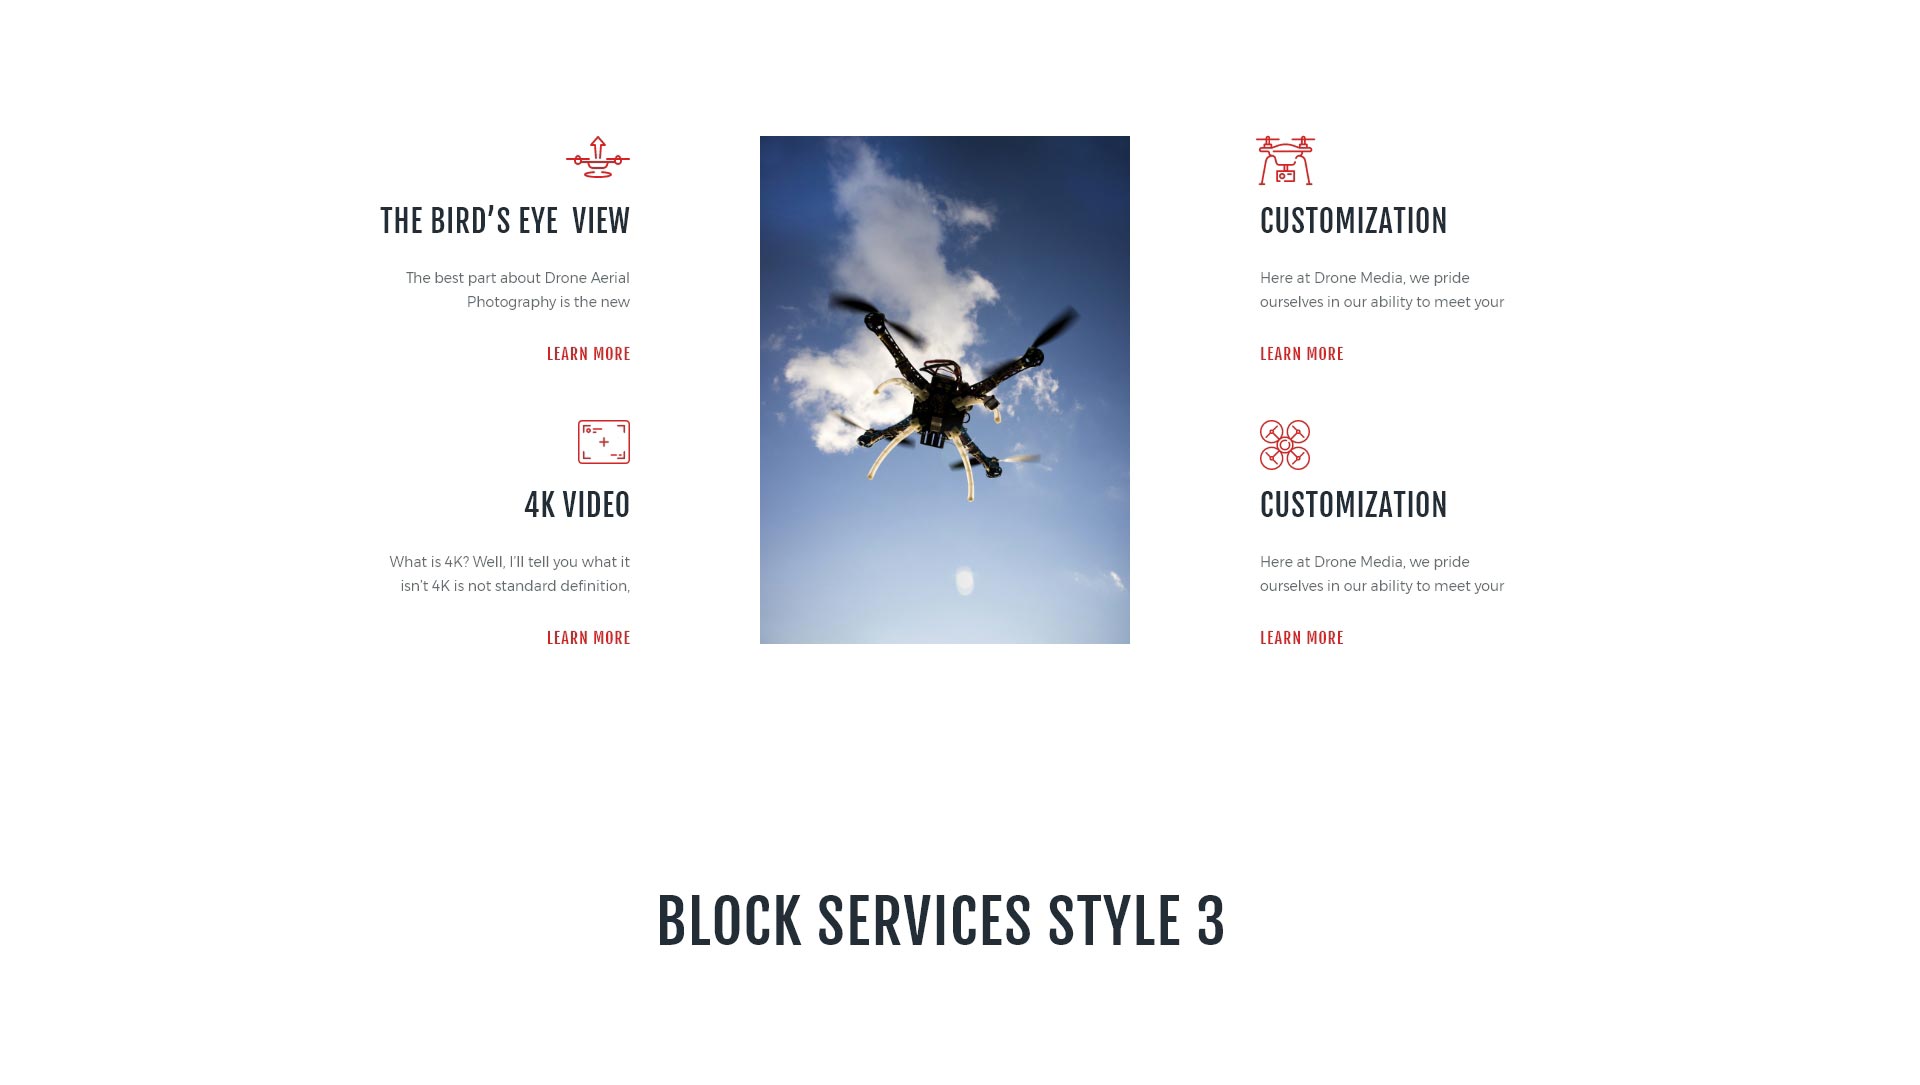 Block services style 3